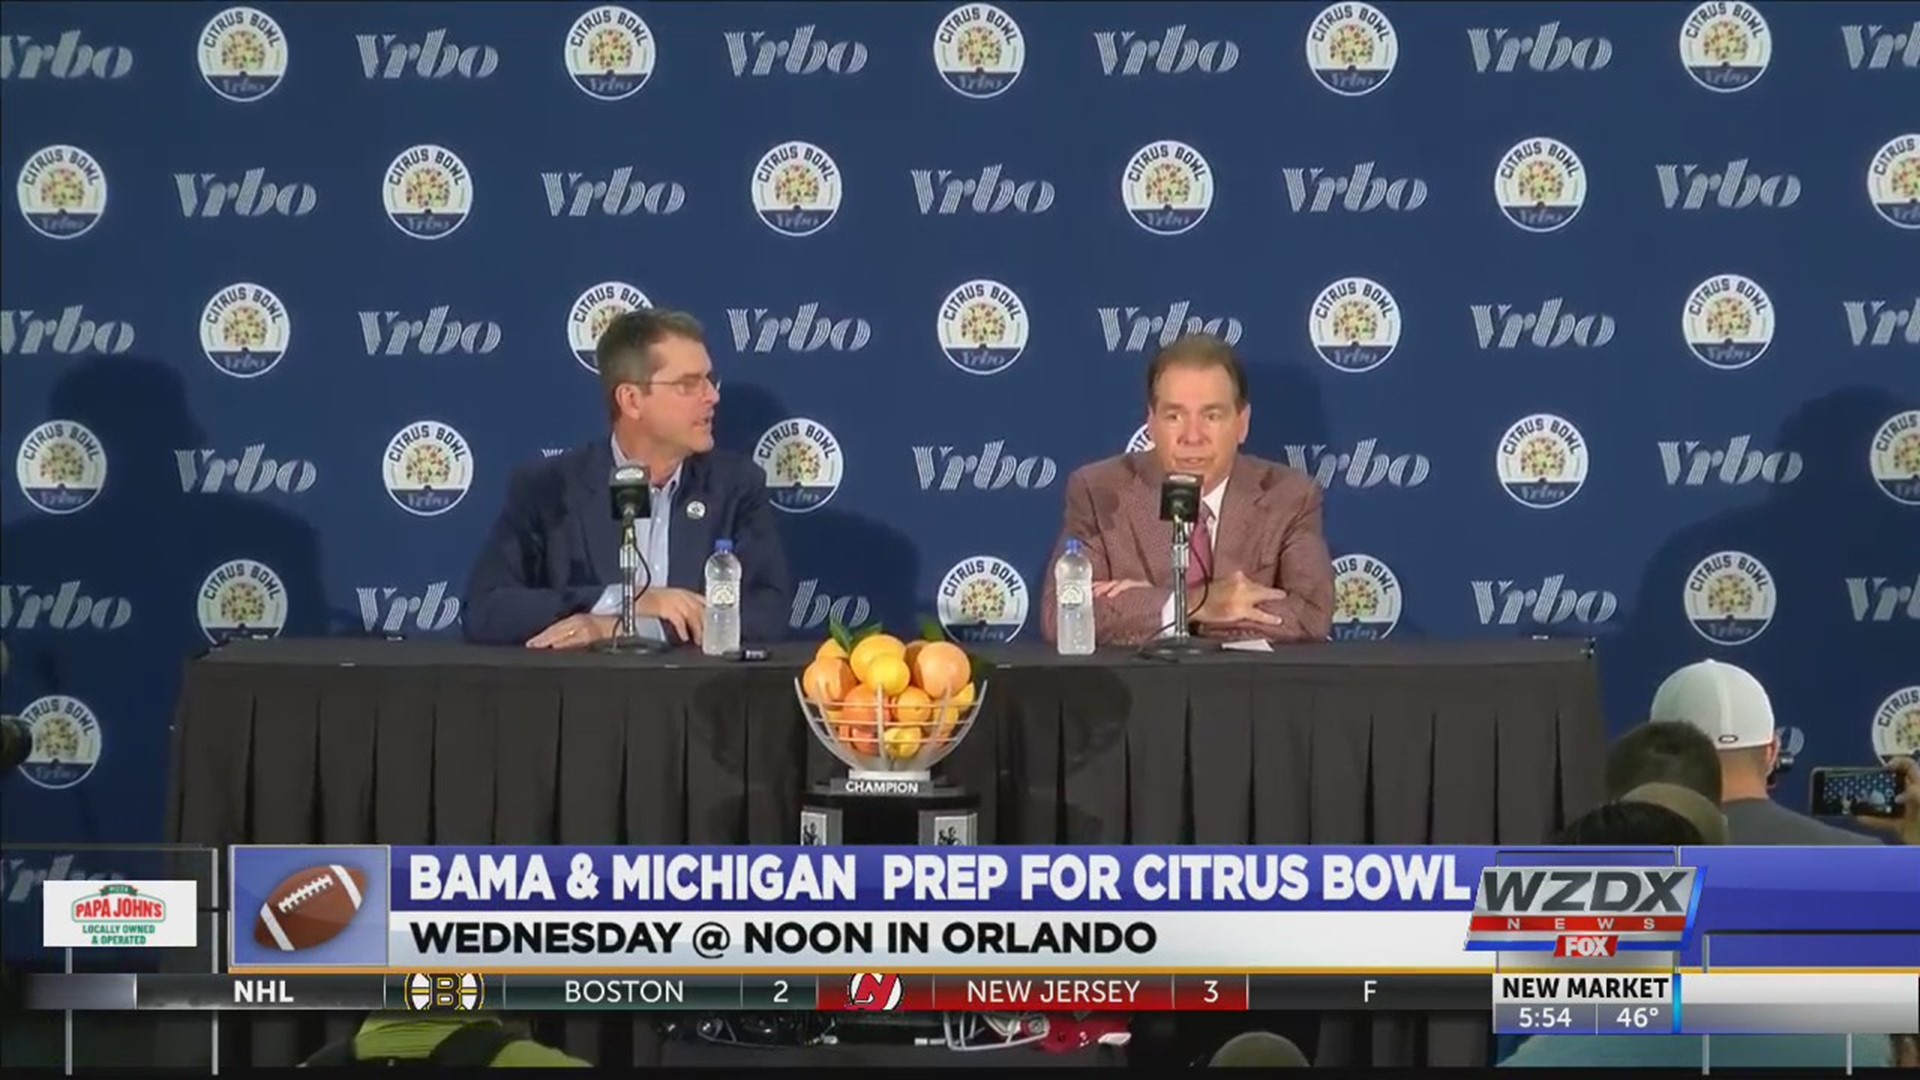 Alabama & Michigan, two of the sport's bluebloods, fell short in their quest to qualify for the College Football Playoff. They instead had to settle for a trip to the Citrus Bowl in Orlando, Fla., on New Year's Day.